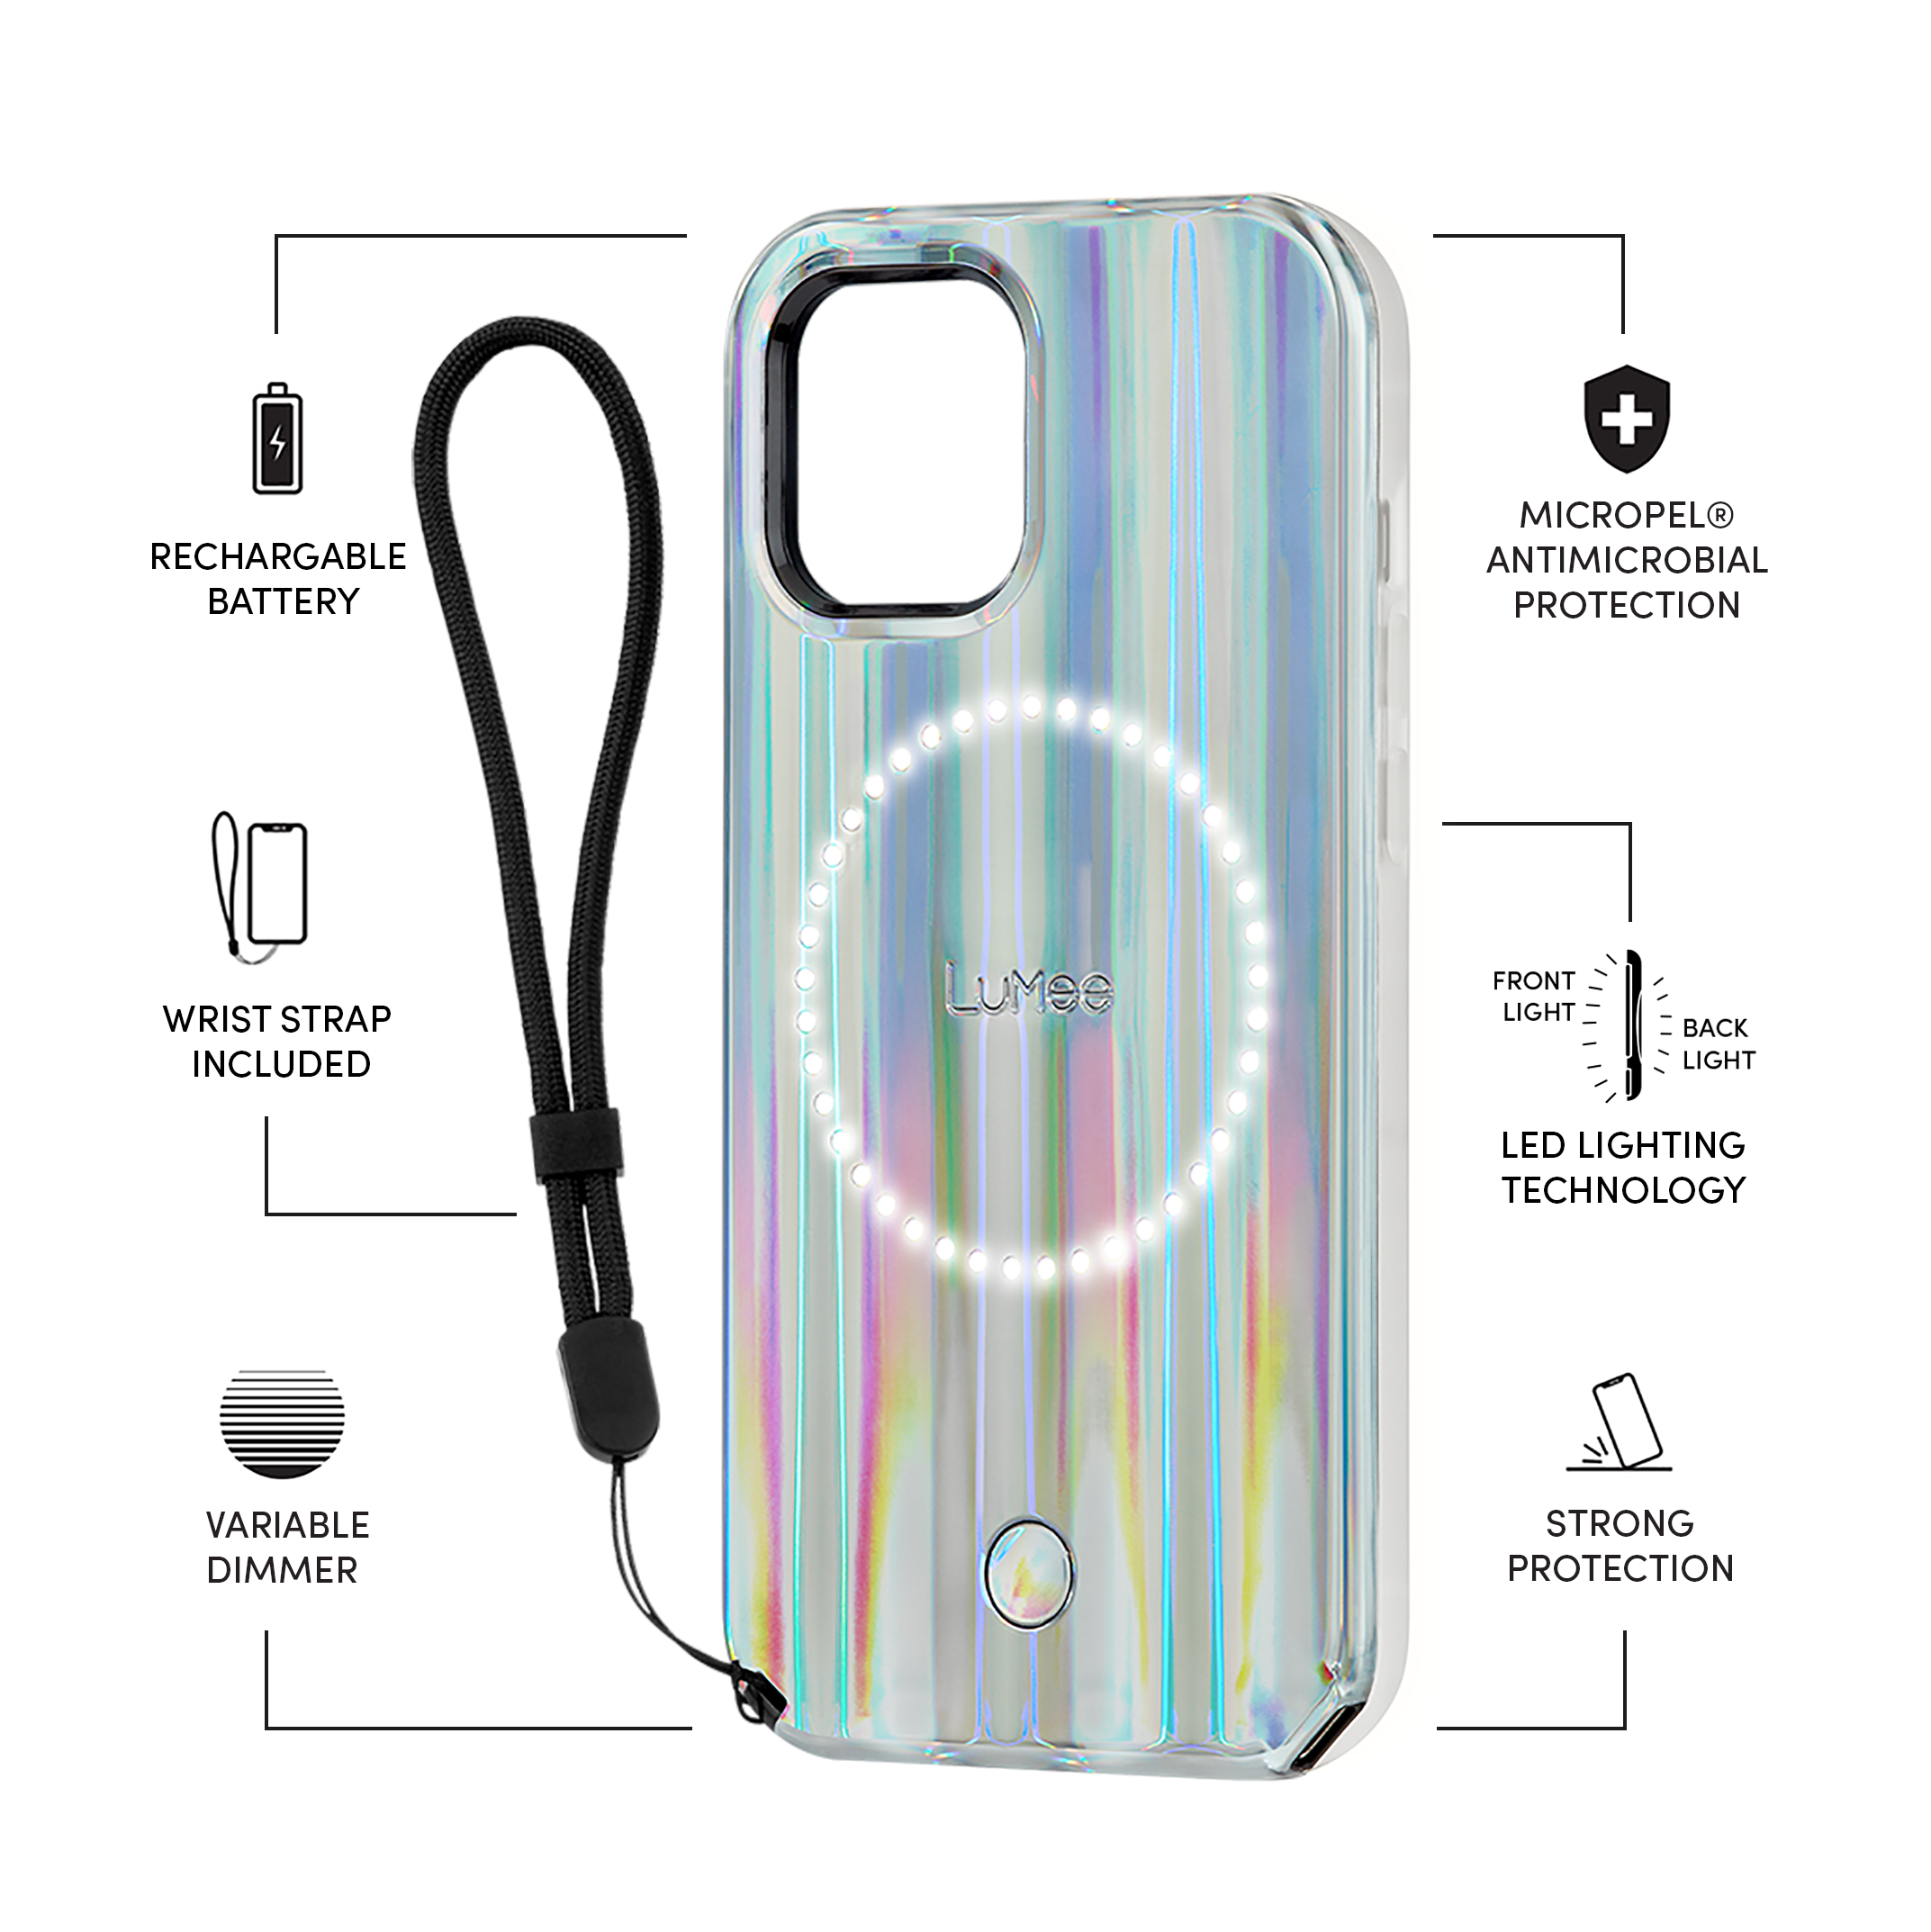 Lumee Halo Selfie Case for Apple iPhone 12 / 12 Pro - Studio-Like Front & Back Light w/ Variable Dimmer & Micropel AntiBacterial Protection Wireless Pass-Through Charging - Bolt